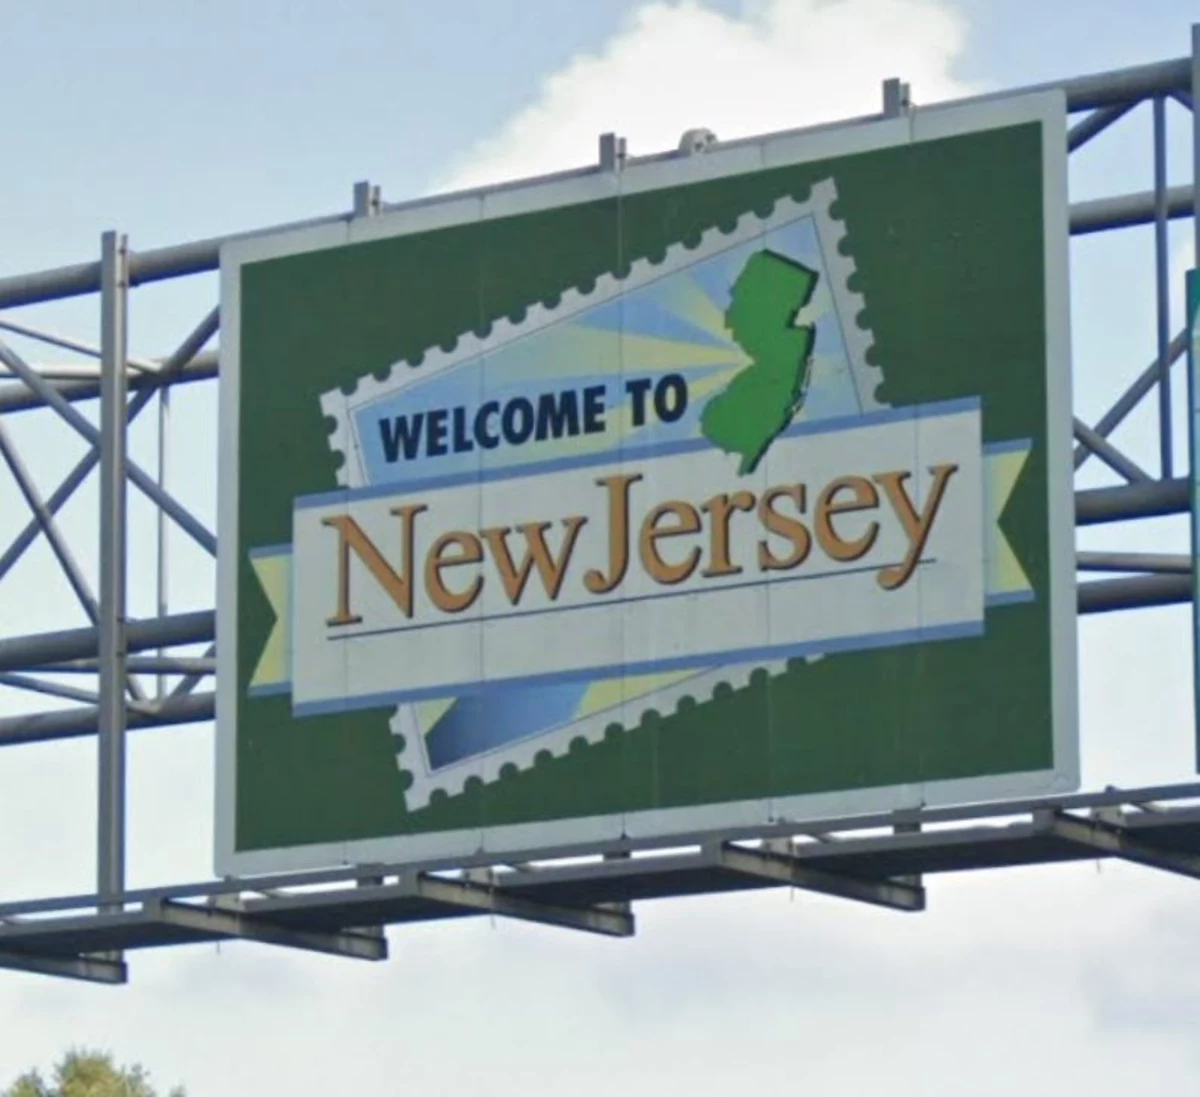 10 Songs That Feature 'New Jersey' in the Lyrics